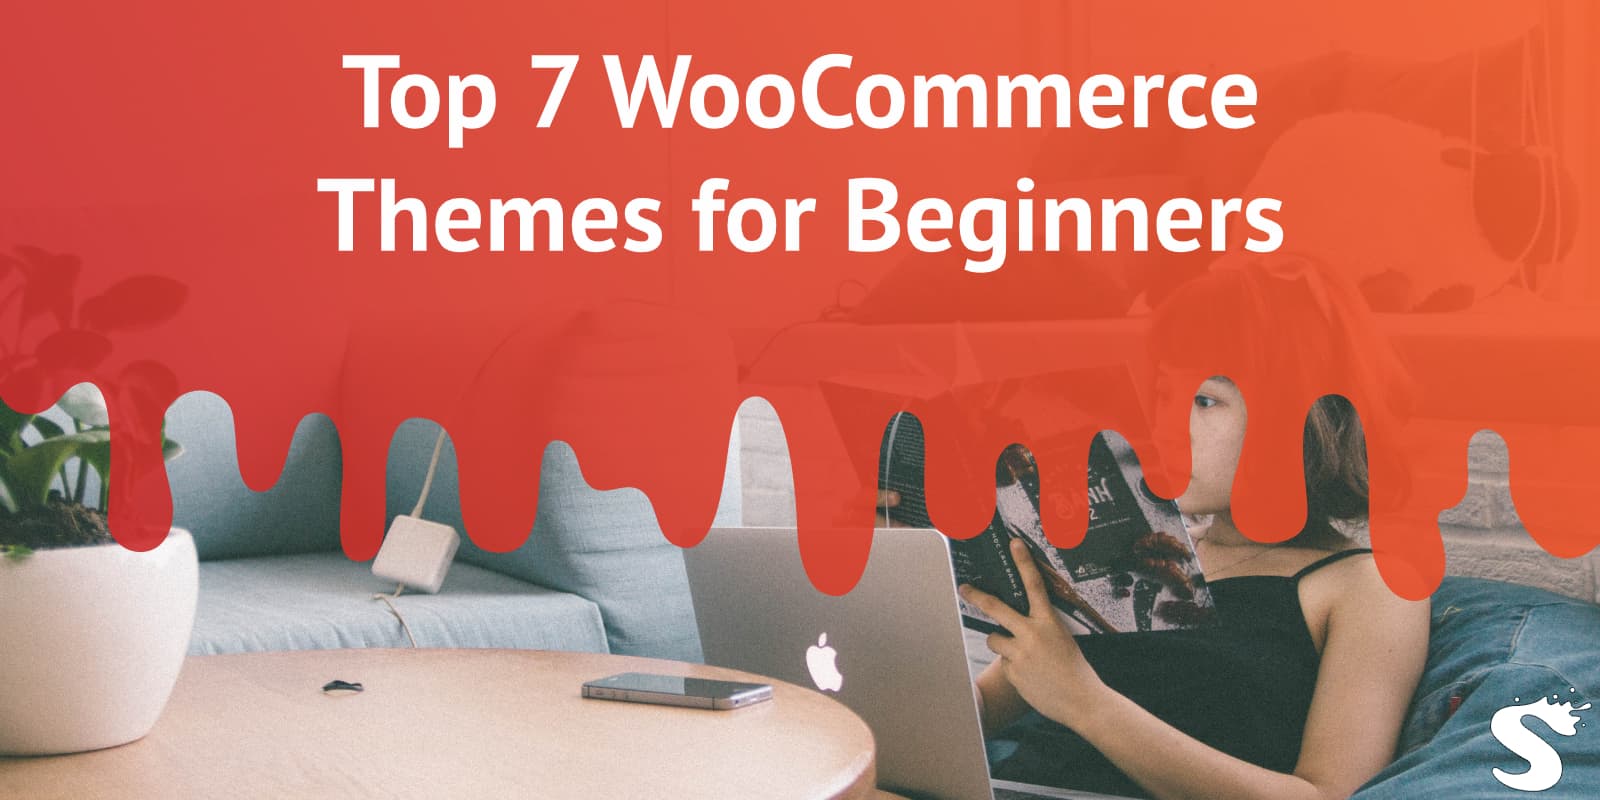 Top 7 WooCommerce Themes for beginners